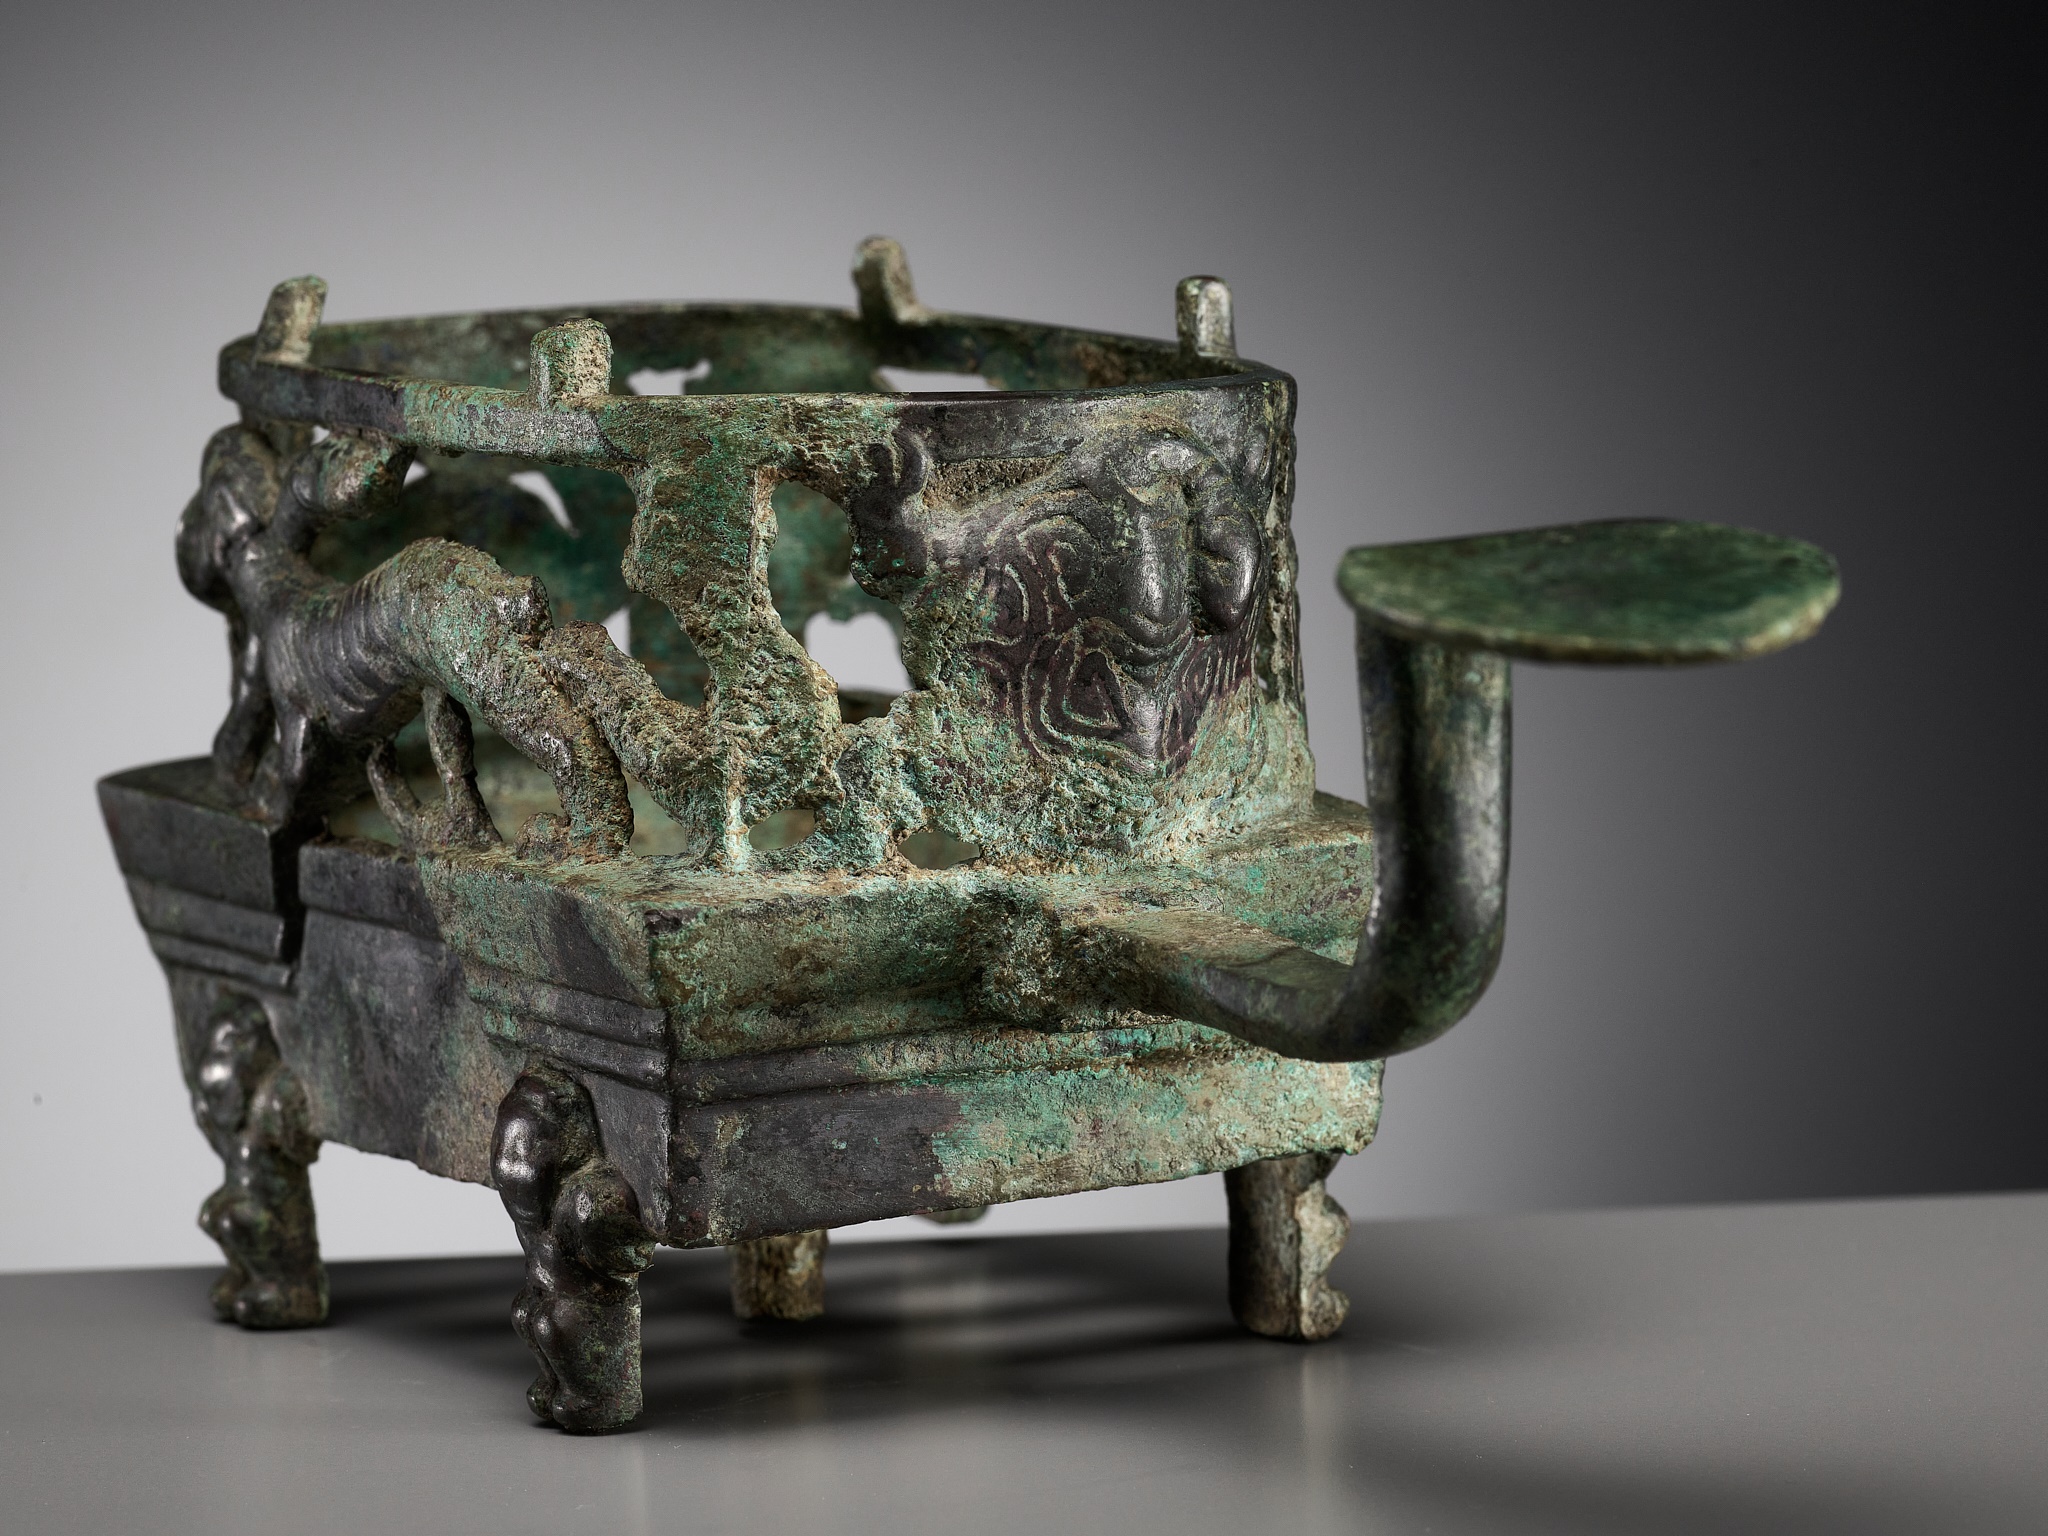 A 'FOUR AUSPICIOUS BEASTS' (SI XIANG) BRONZE BRAZIER, HAN DYNASTY, CHINA, 206 BC-220 AD - Image 6 of 16